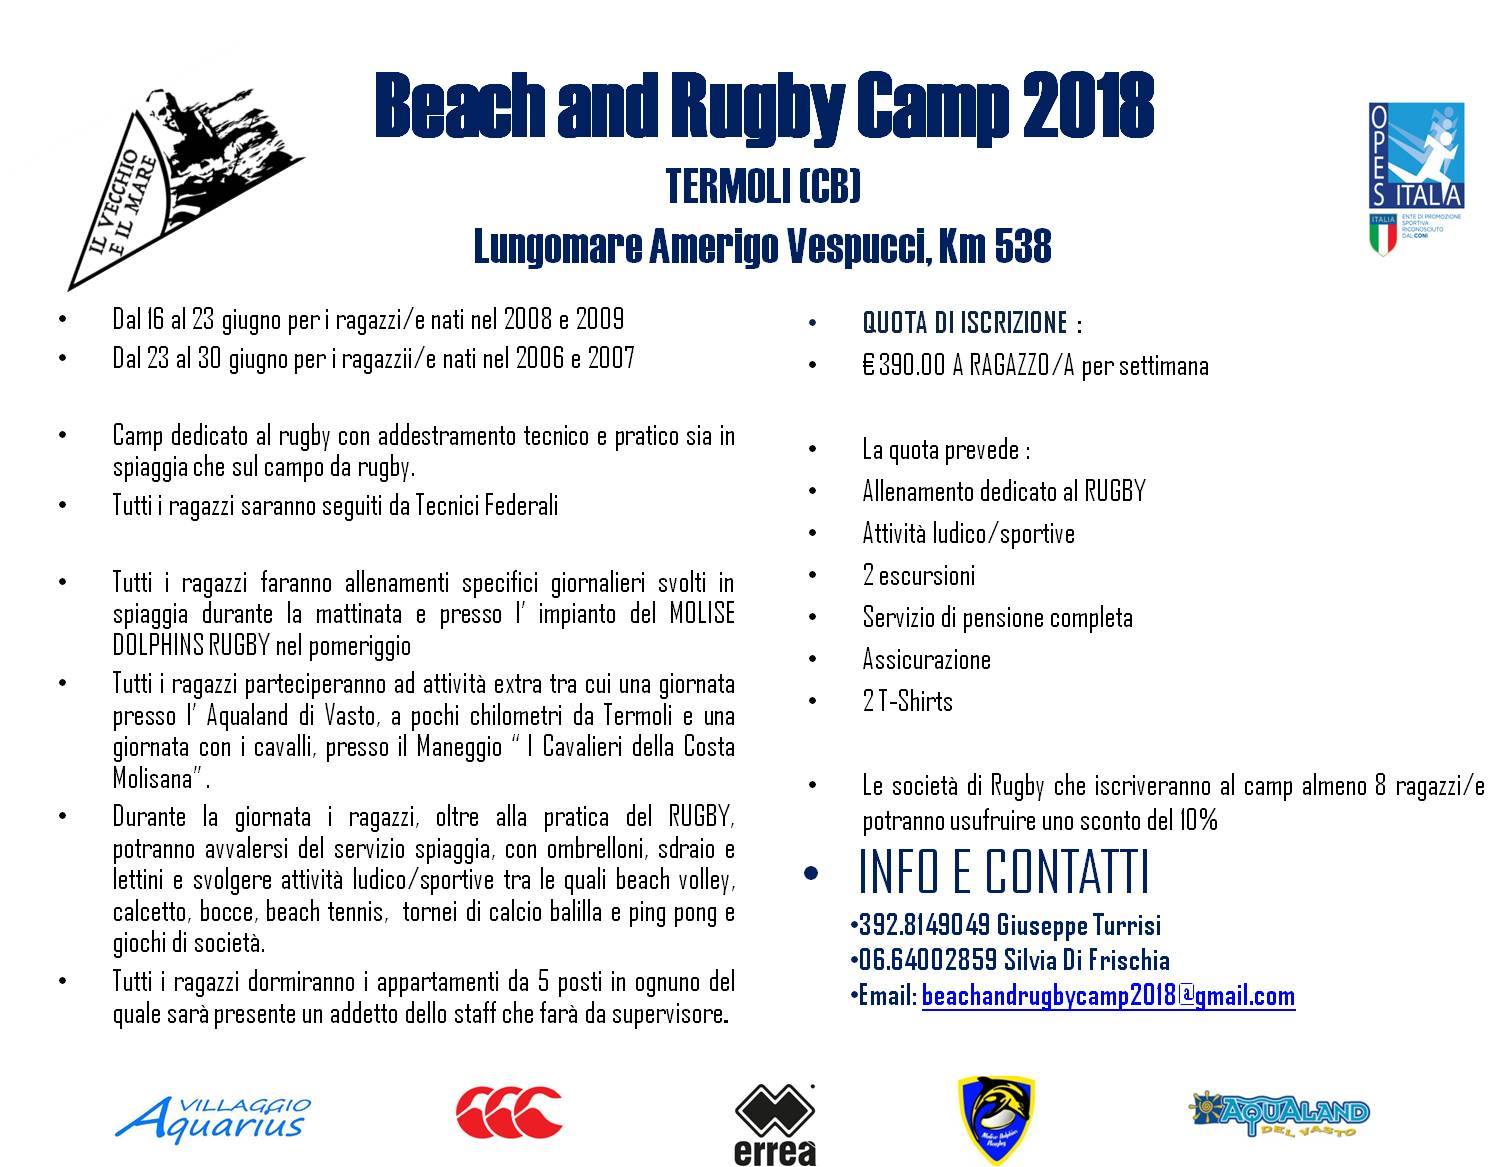 Beach and Rugby Camp – Termoli 2018